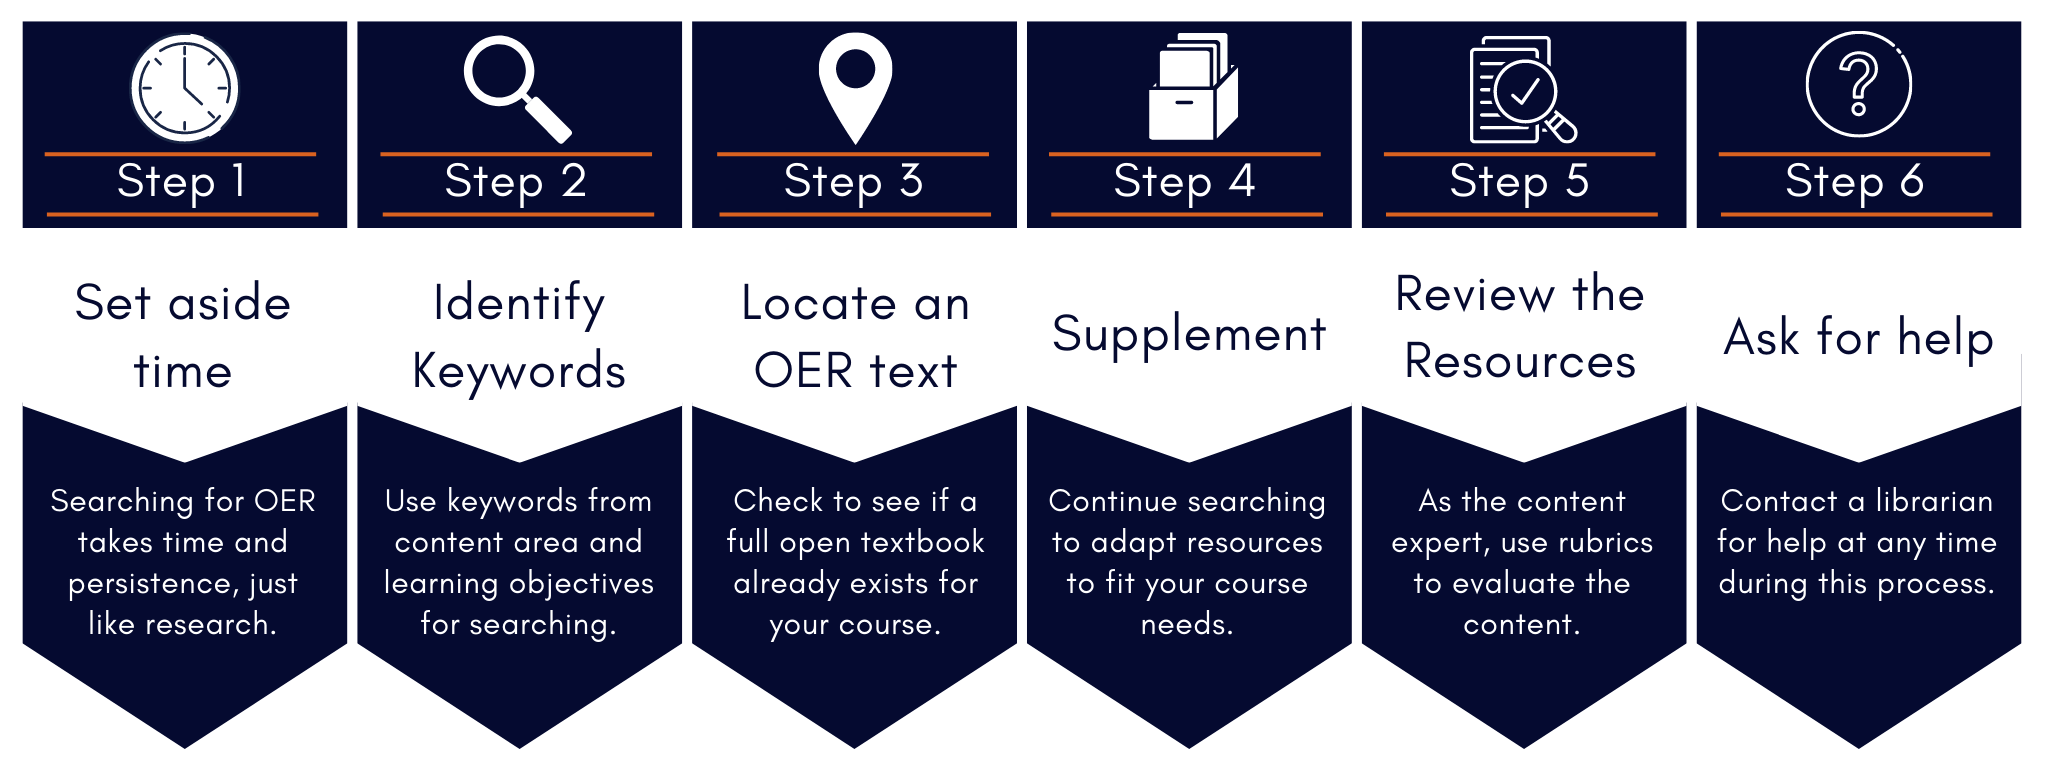 Six steps to begin your search for Open Educational Resources.